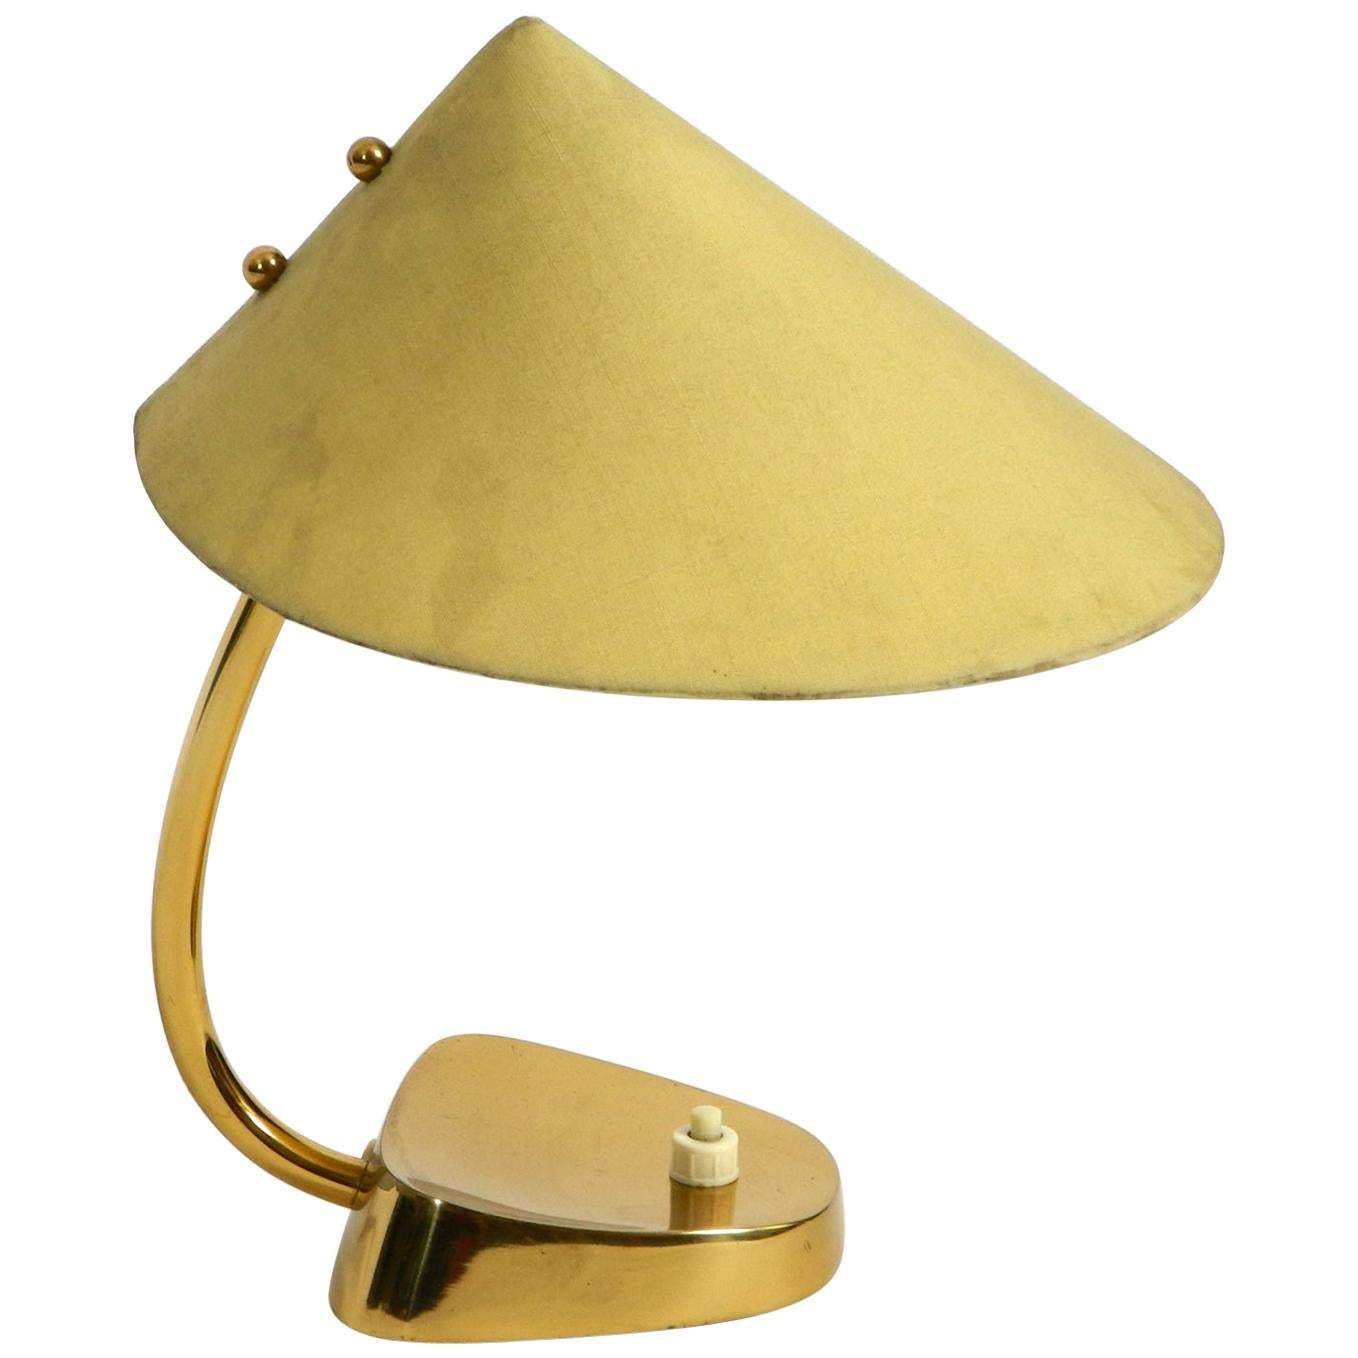 Very Rare Midcentury Brass Table Lamp with Fabric Shade by J. T. Kalmar Austria